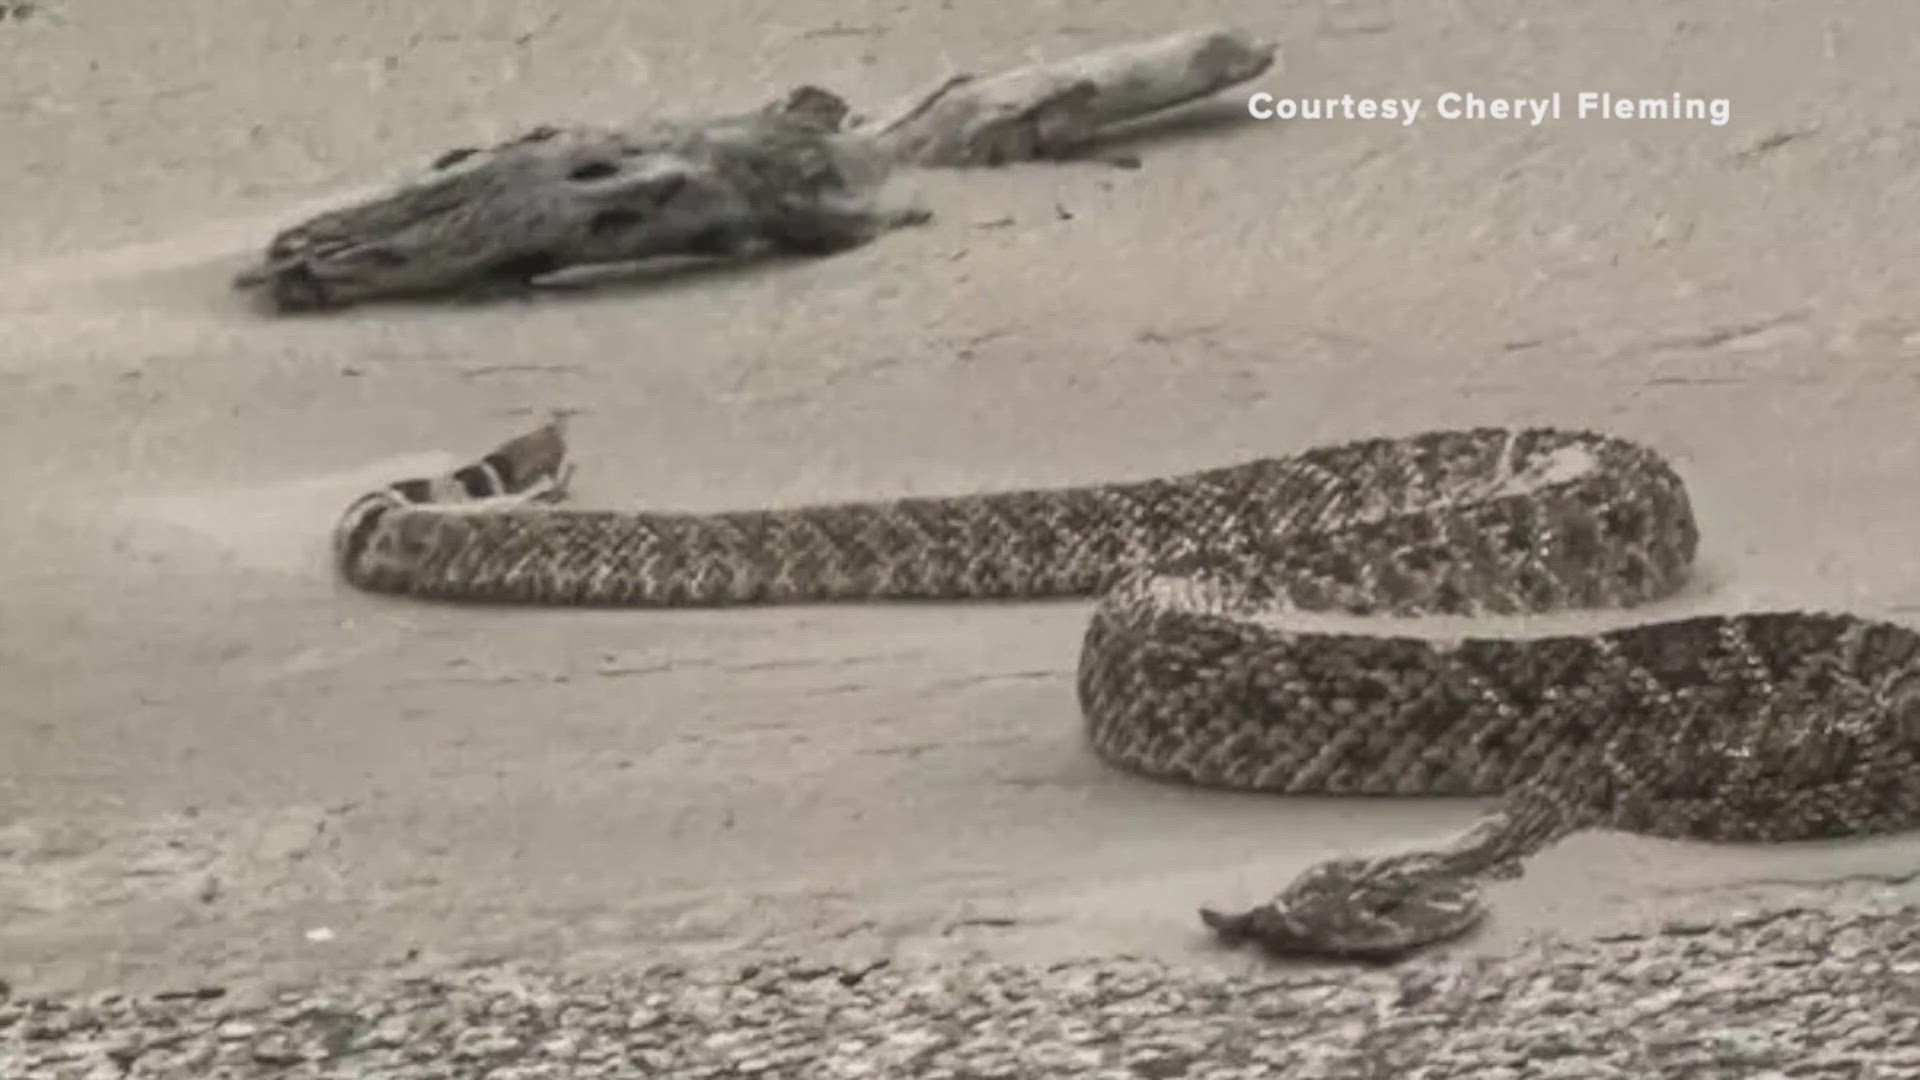 Texans are being warned about rattlesnakes showing up in unusual Texas areas such as the beach.